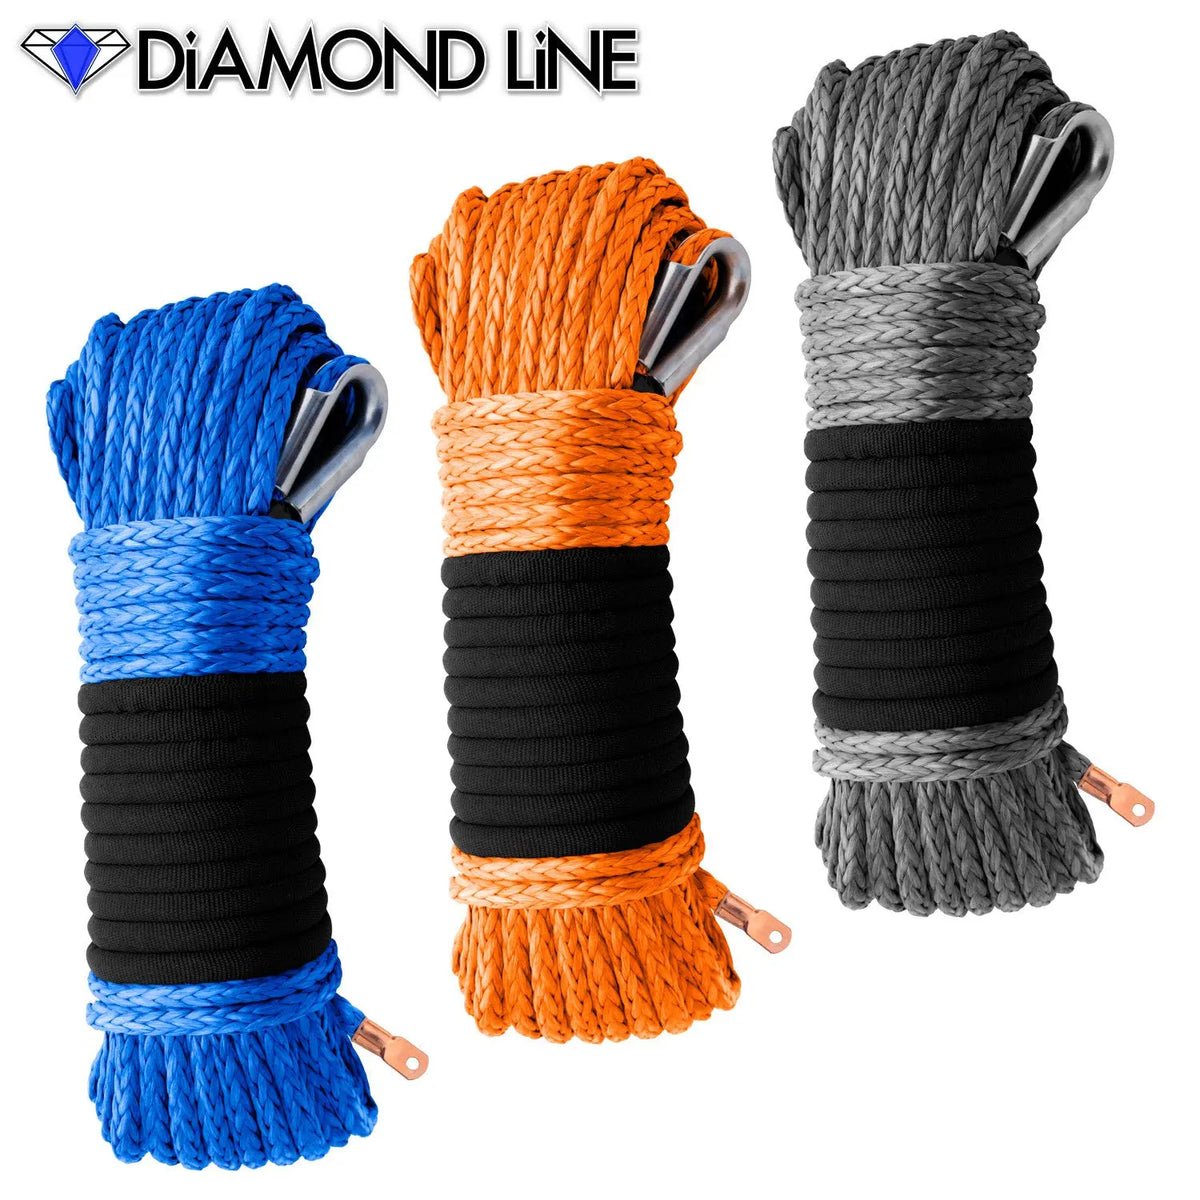 5/16" Diamond Line Winch Rope Mainline - Assorted Colors.